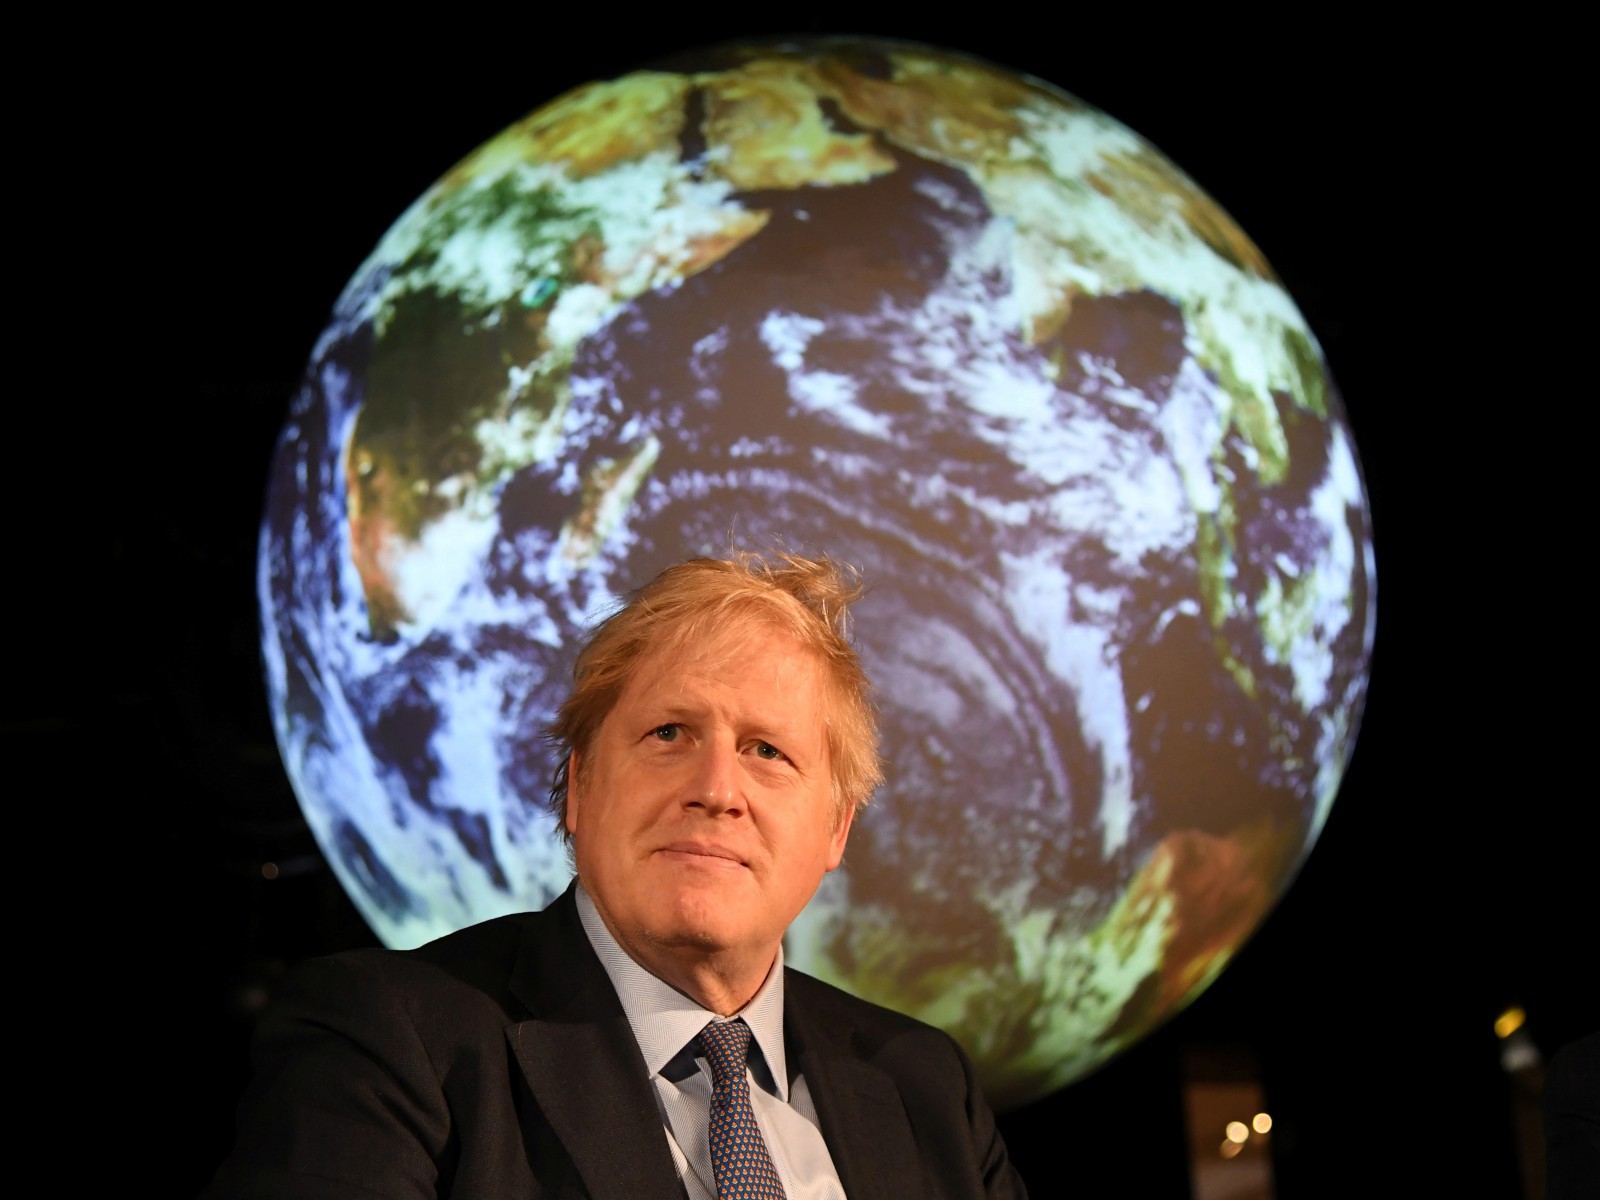 The ex-Tory minister's attack overshadowed the PM's launch of the COP26 climate change summit